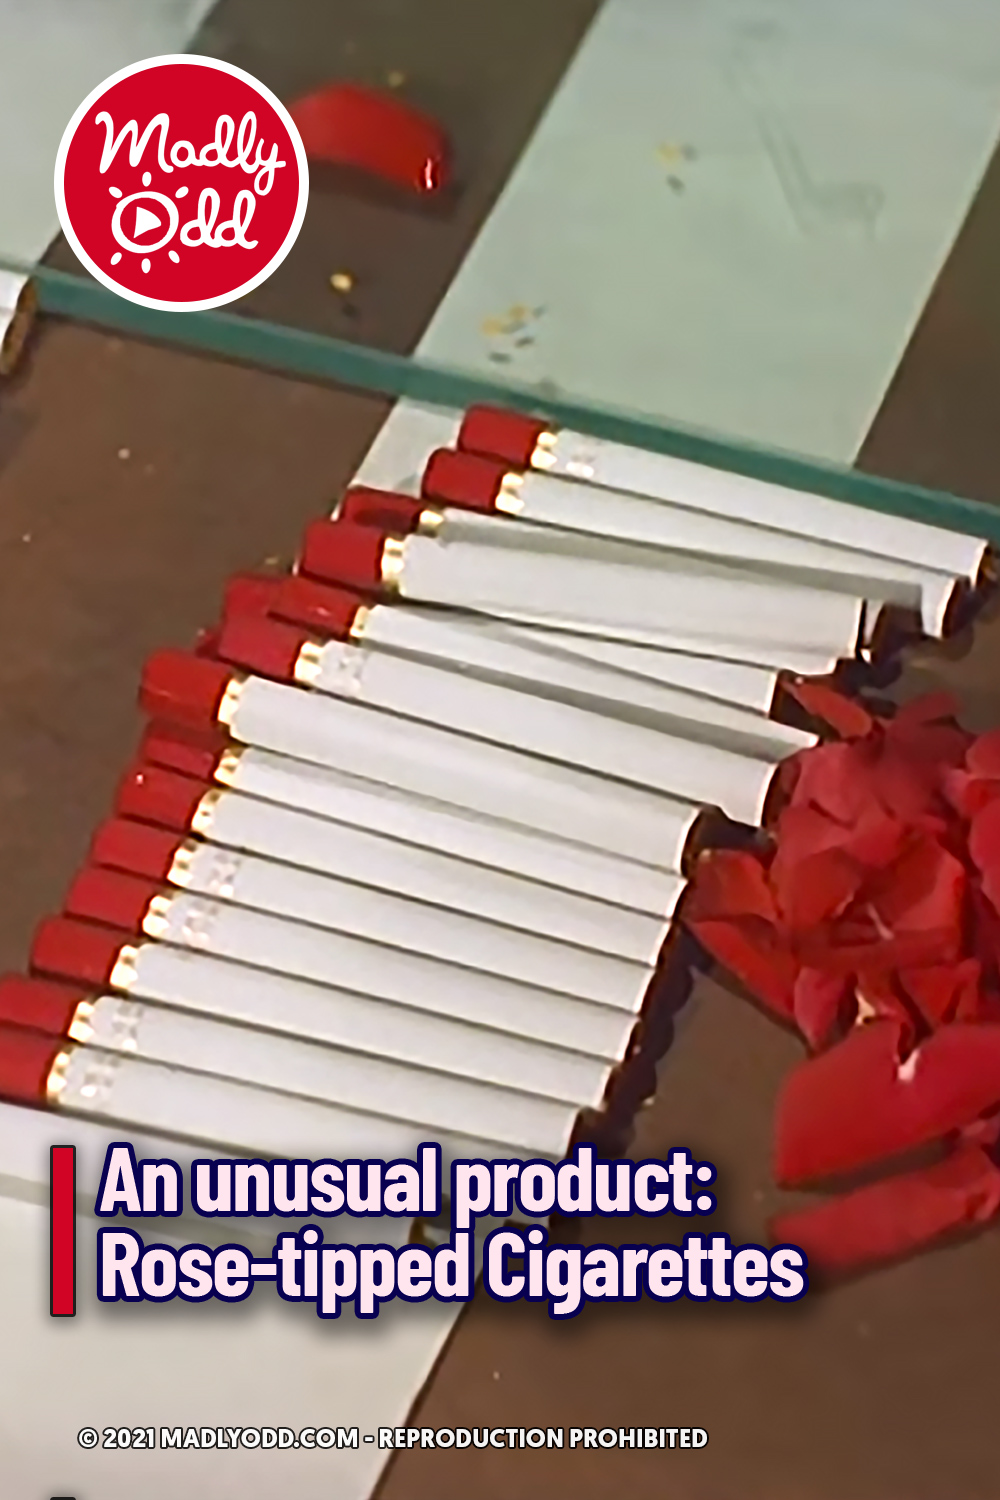 An unusual product: Rose-tipped Cigarettes